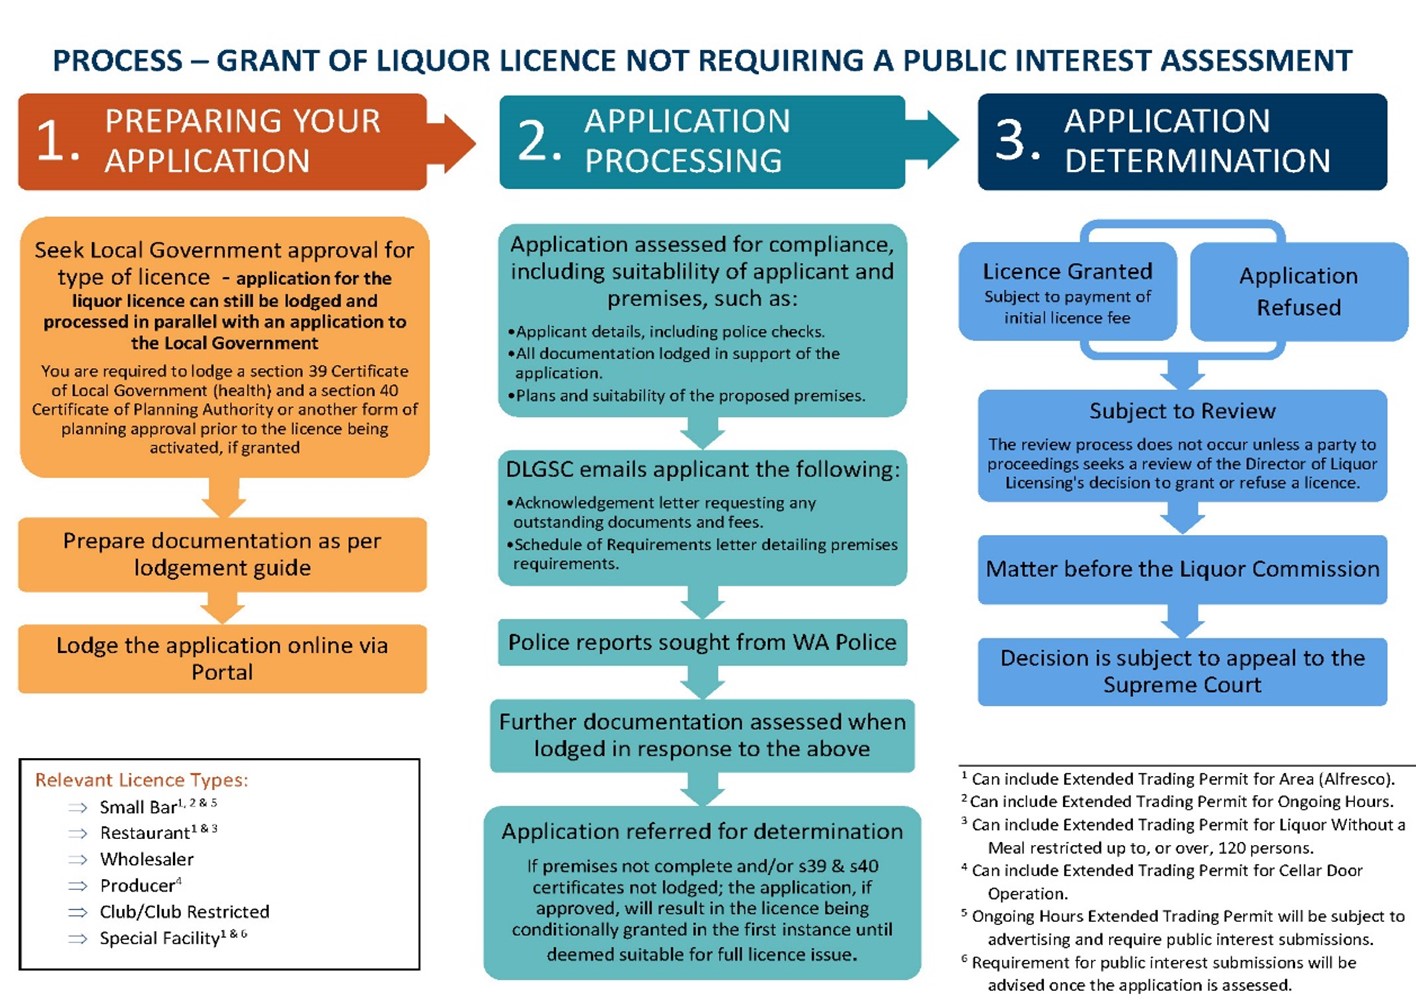 Figure 4  The process for granting a liquor licence not requiring a PIA